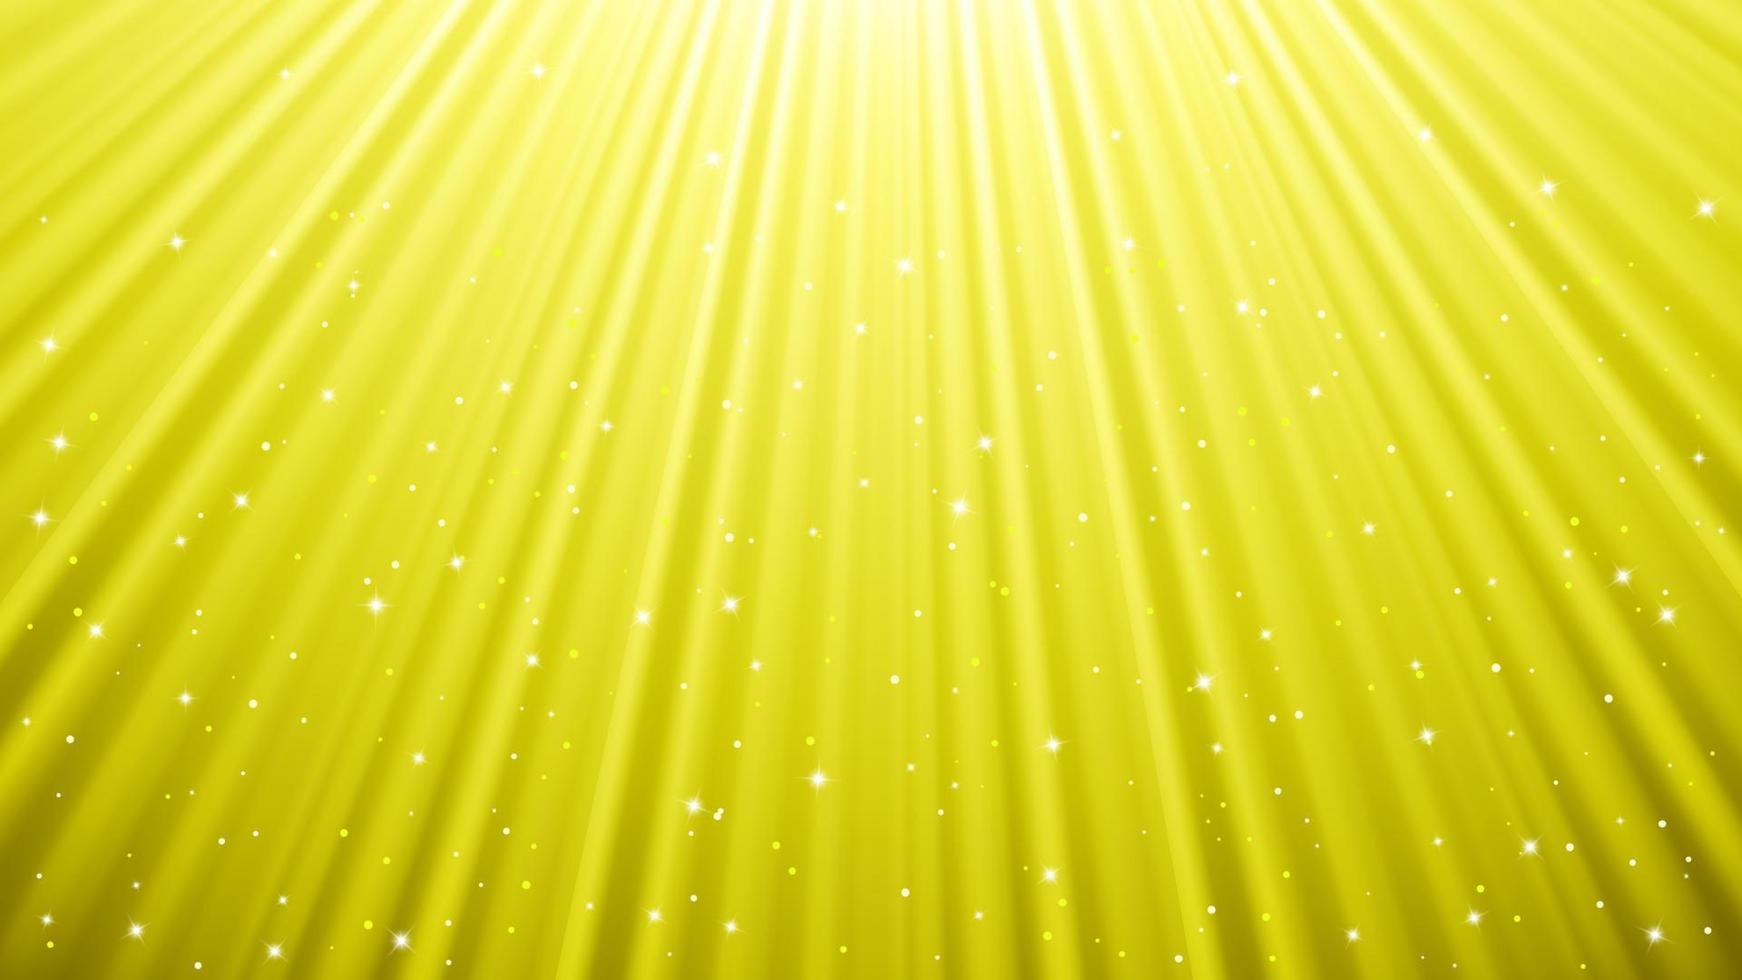 Sunlight rays background with light effects. Yellow backdrop with light of radiance. Vector illustration